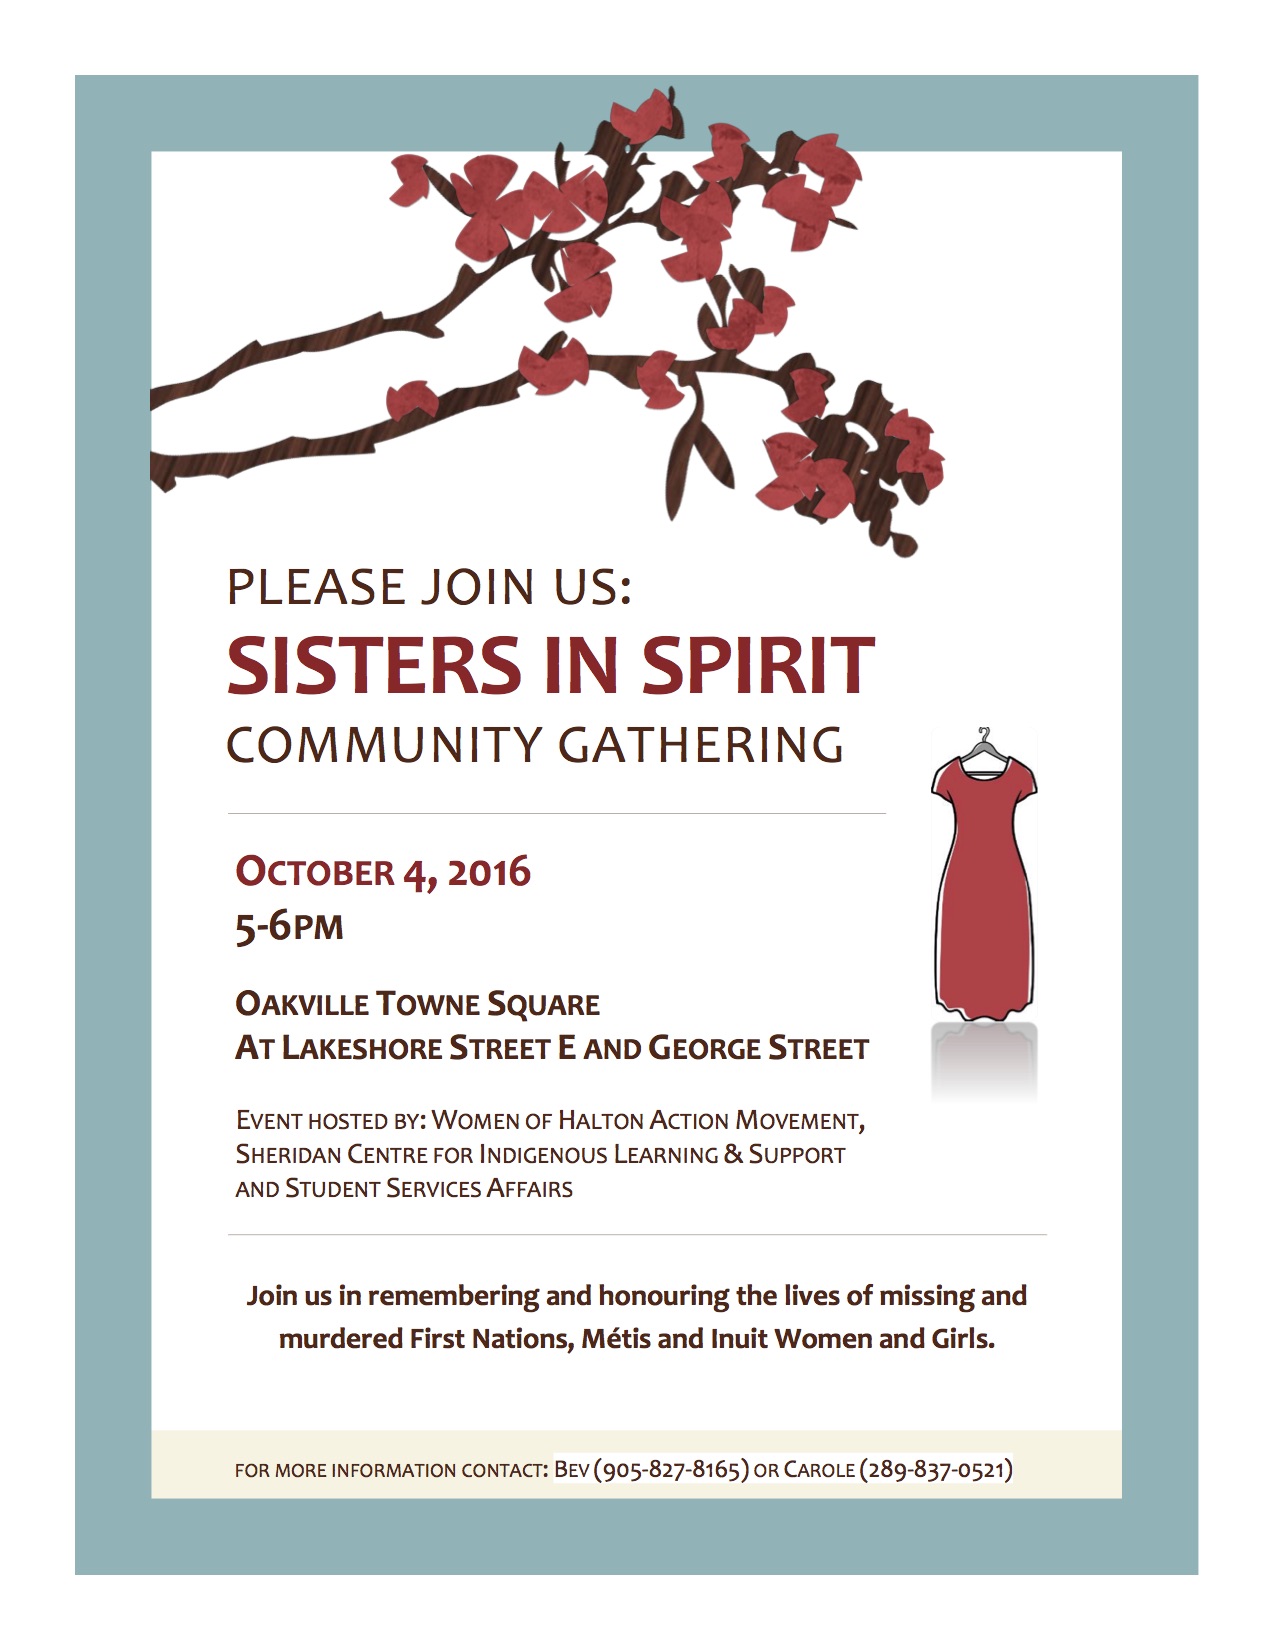 PLEASE JOIN US: SISTERS IN SPIRIT